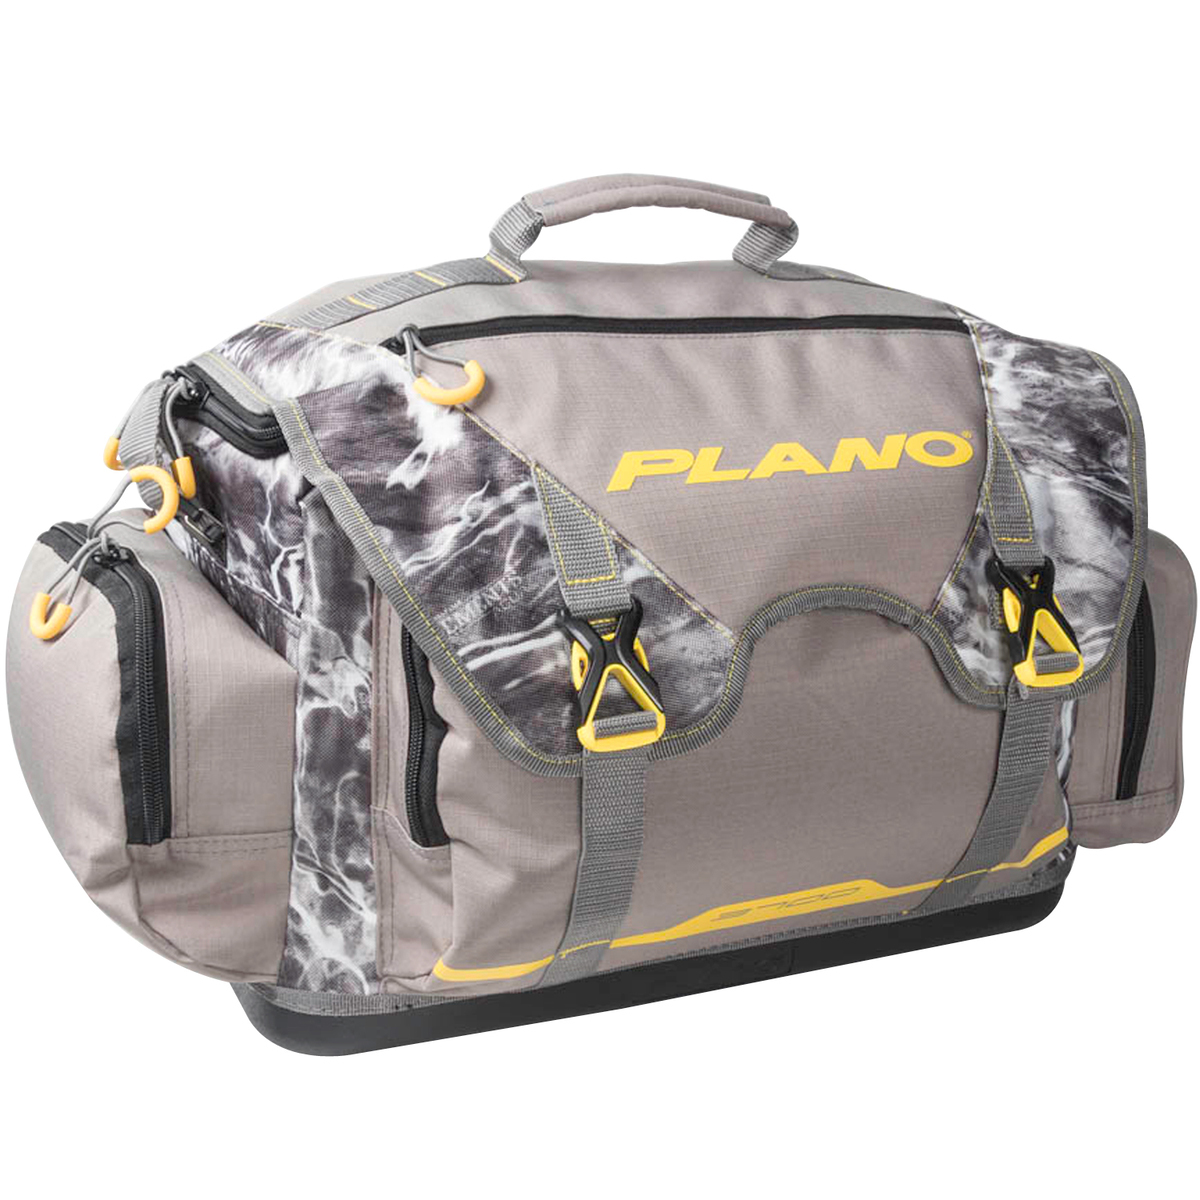 Plano Z-Series 3600 Tackle Bag  10% Off w/ Free Shipping and Handling